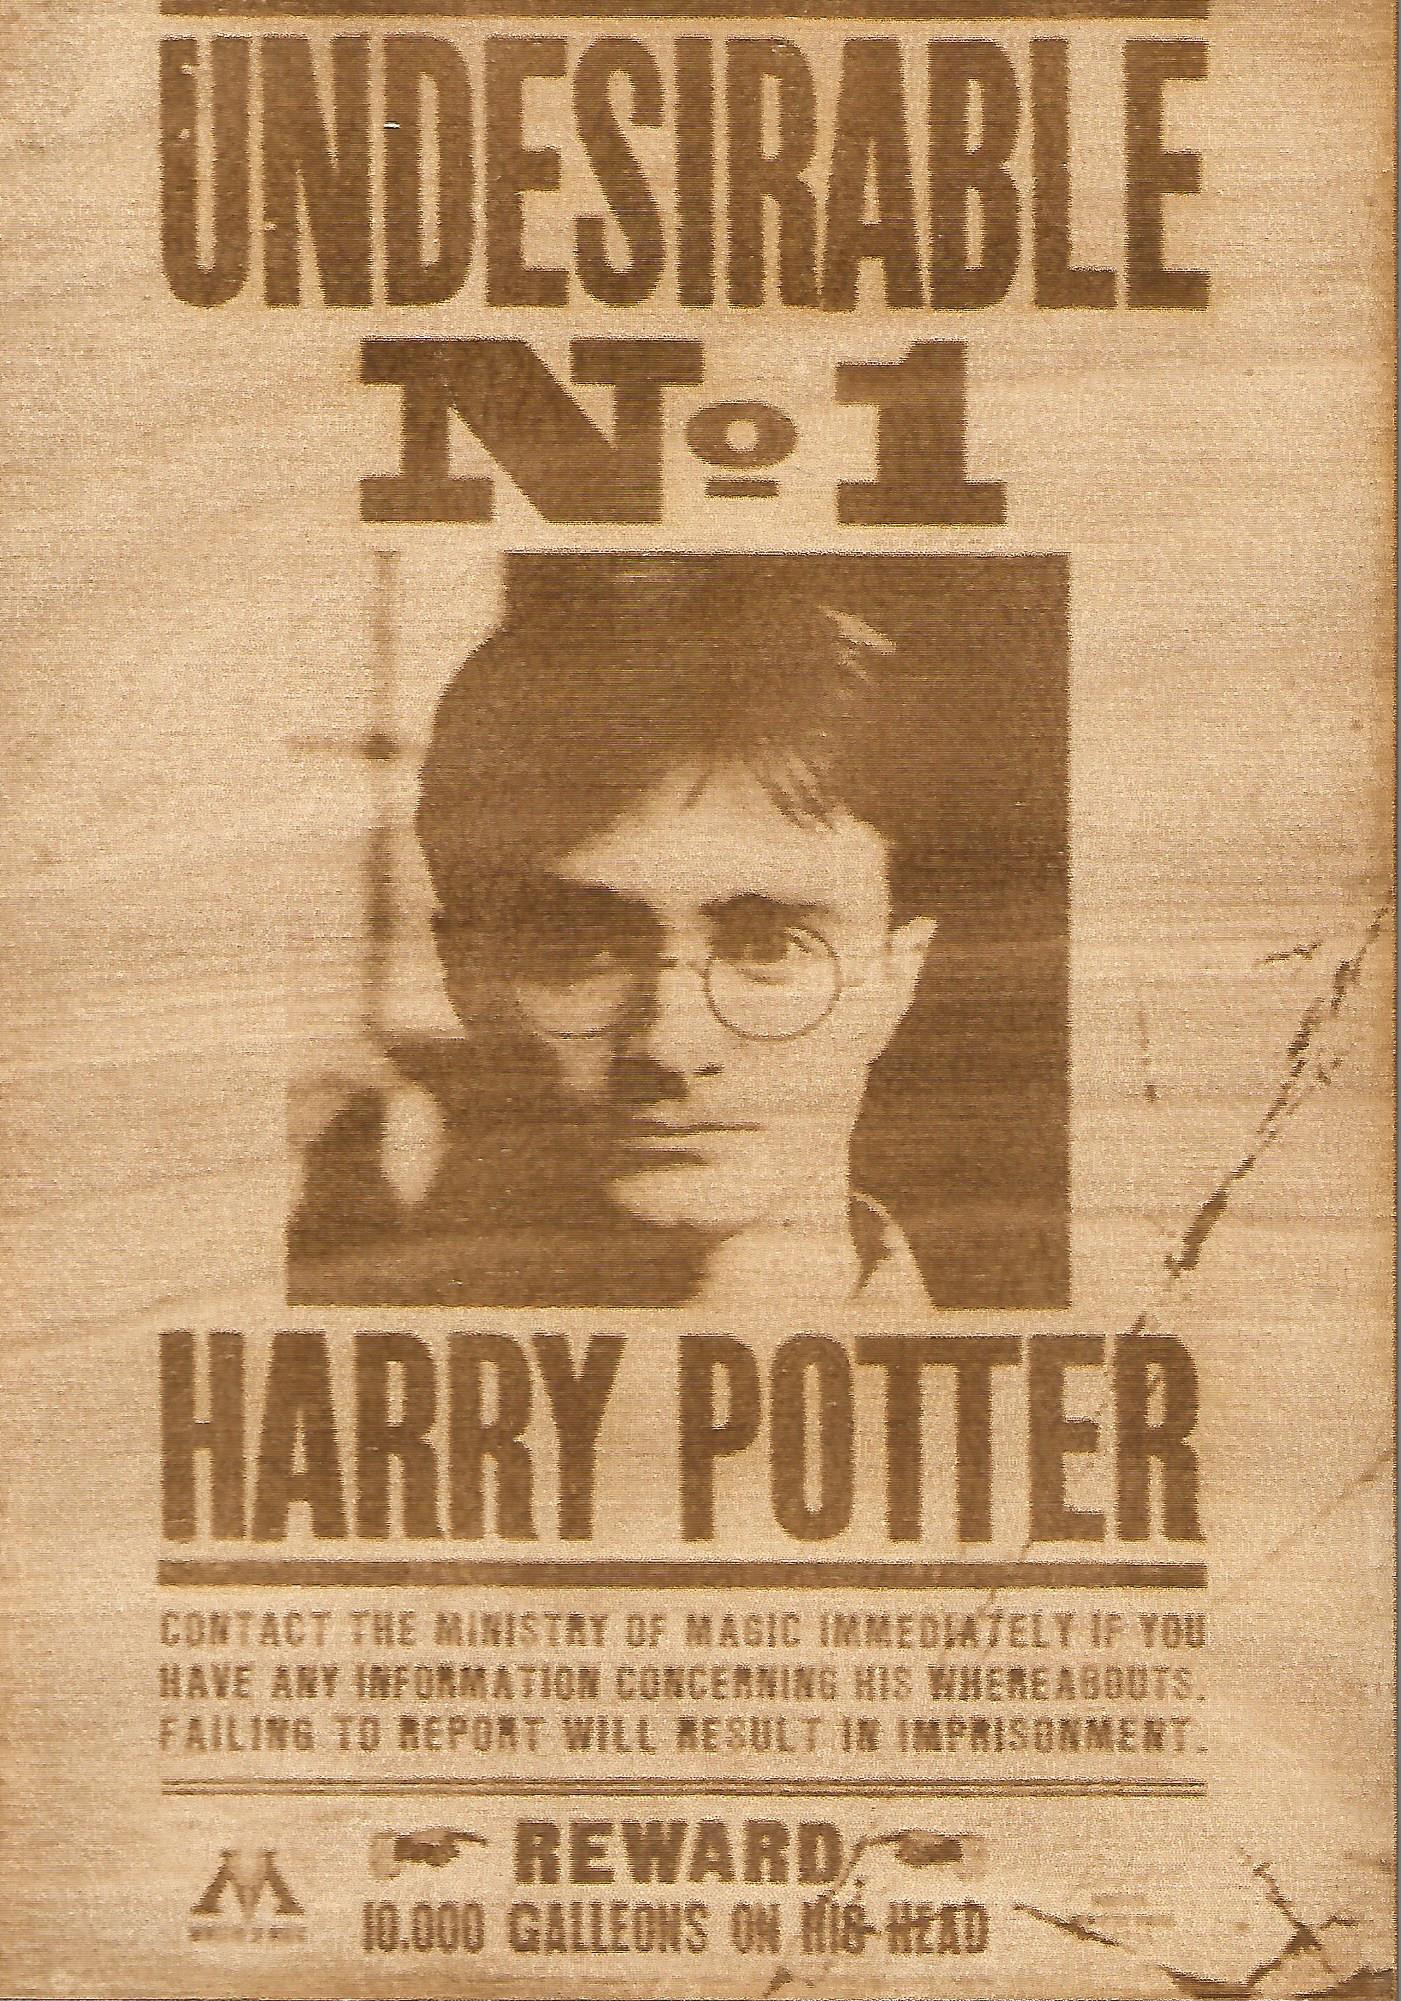 Harry Potter - Harry Potter (Undesirable No. 1) Wooden Wanted Poster - TantrumCollectibles.com